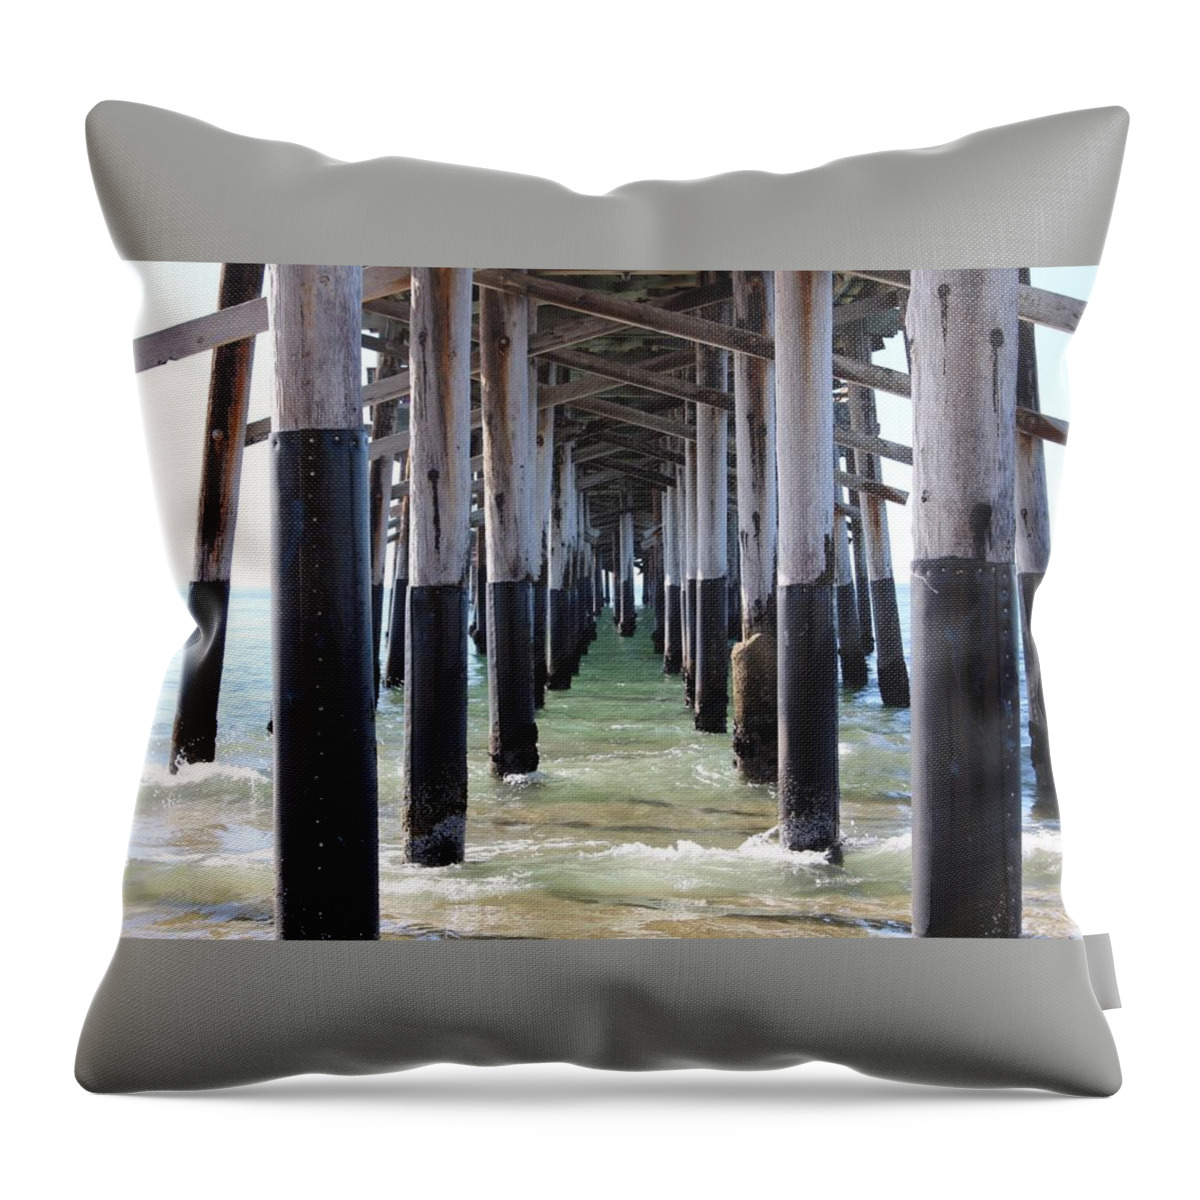 Pier Throw Pillow featuring the photograph Under The Pier by Brian Eberly